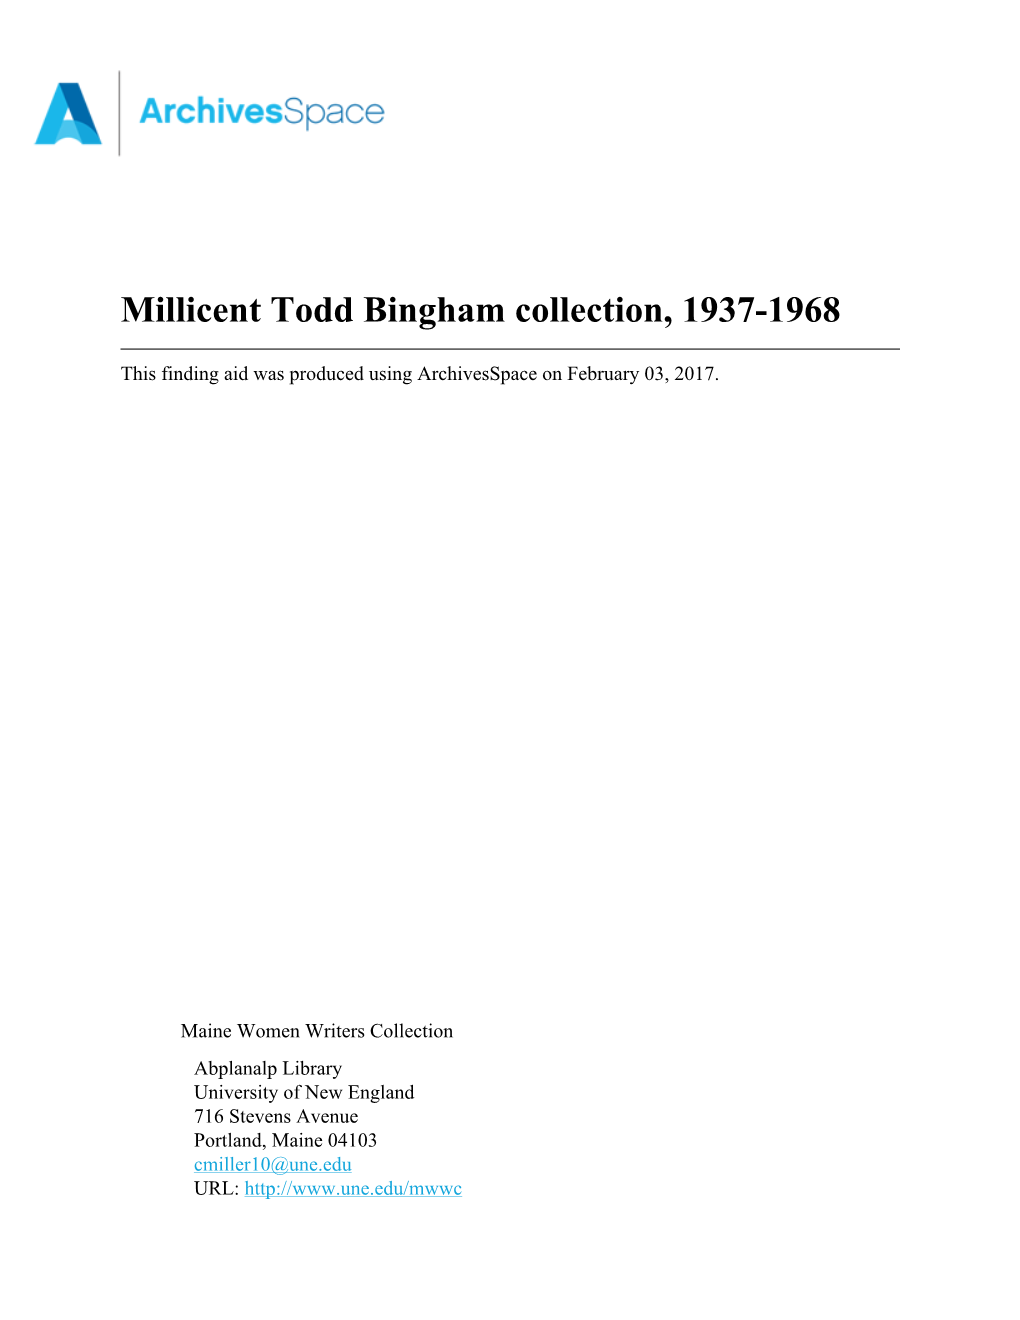 Millicent Todd Bingham Collection, 1937-1968